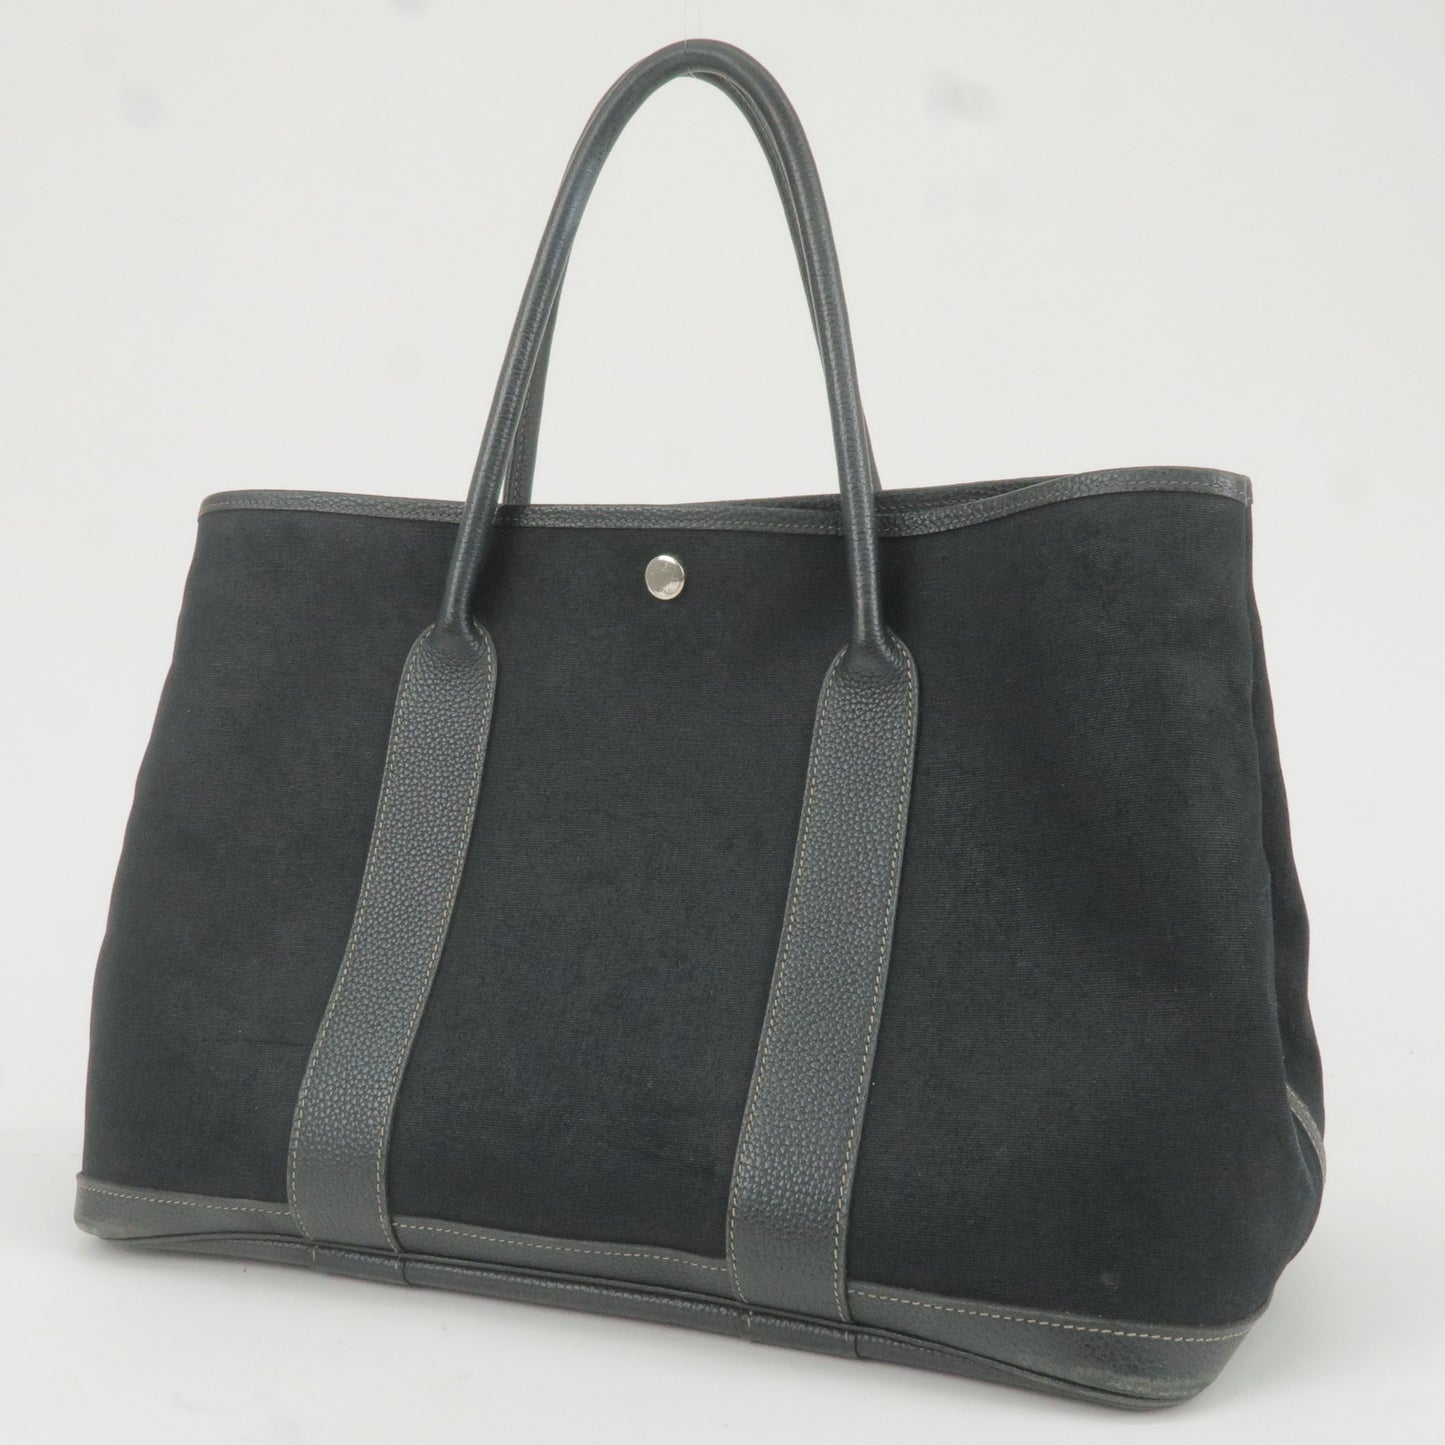 HERMES Garden Party PM Canvas Leather Tote Bag Black